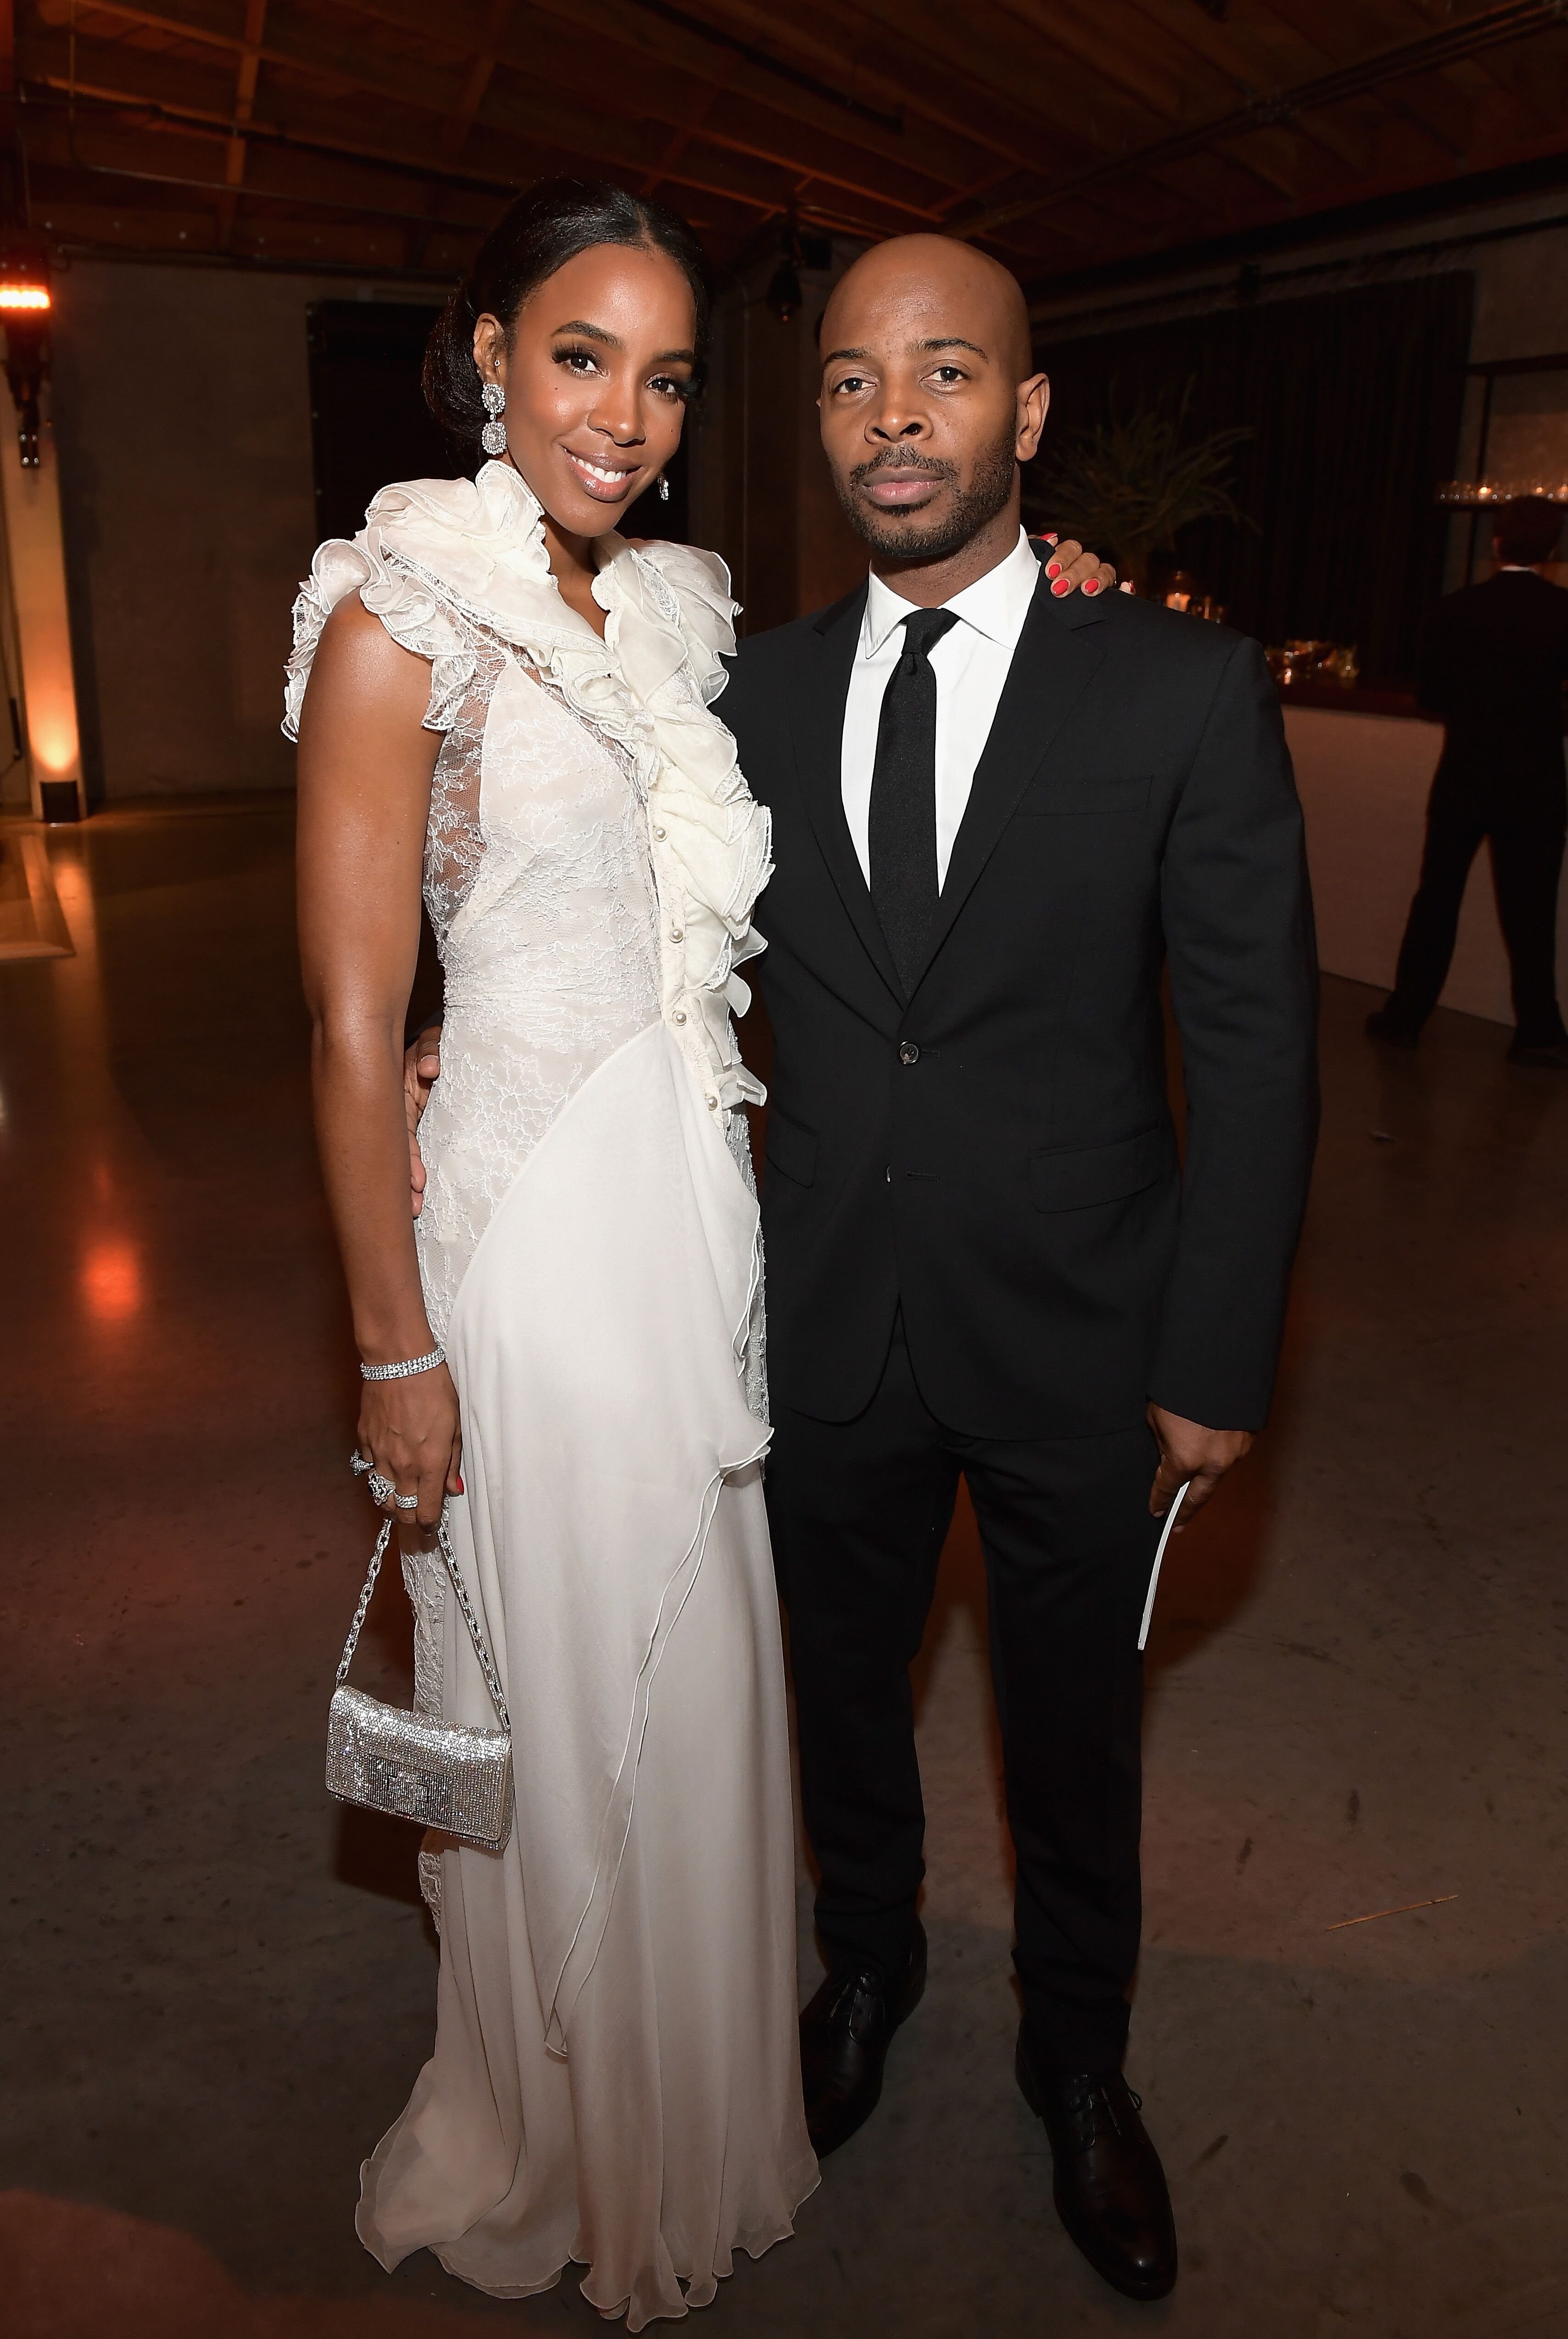 Kelly Rowland and Tim Weatherspoon attend the 2017 Baby2Baby Gala presented by Paul Mitchell on November 11, 2017. | Photo: Getty Images